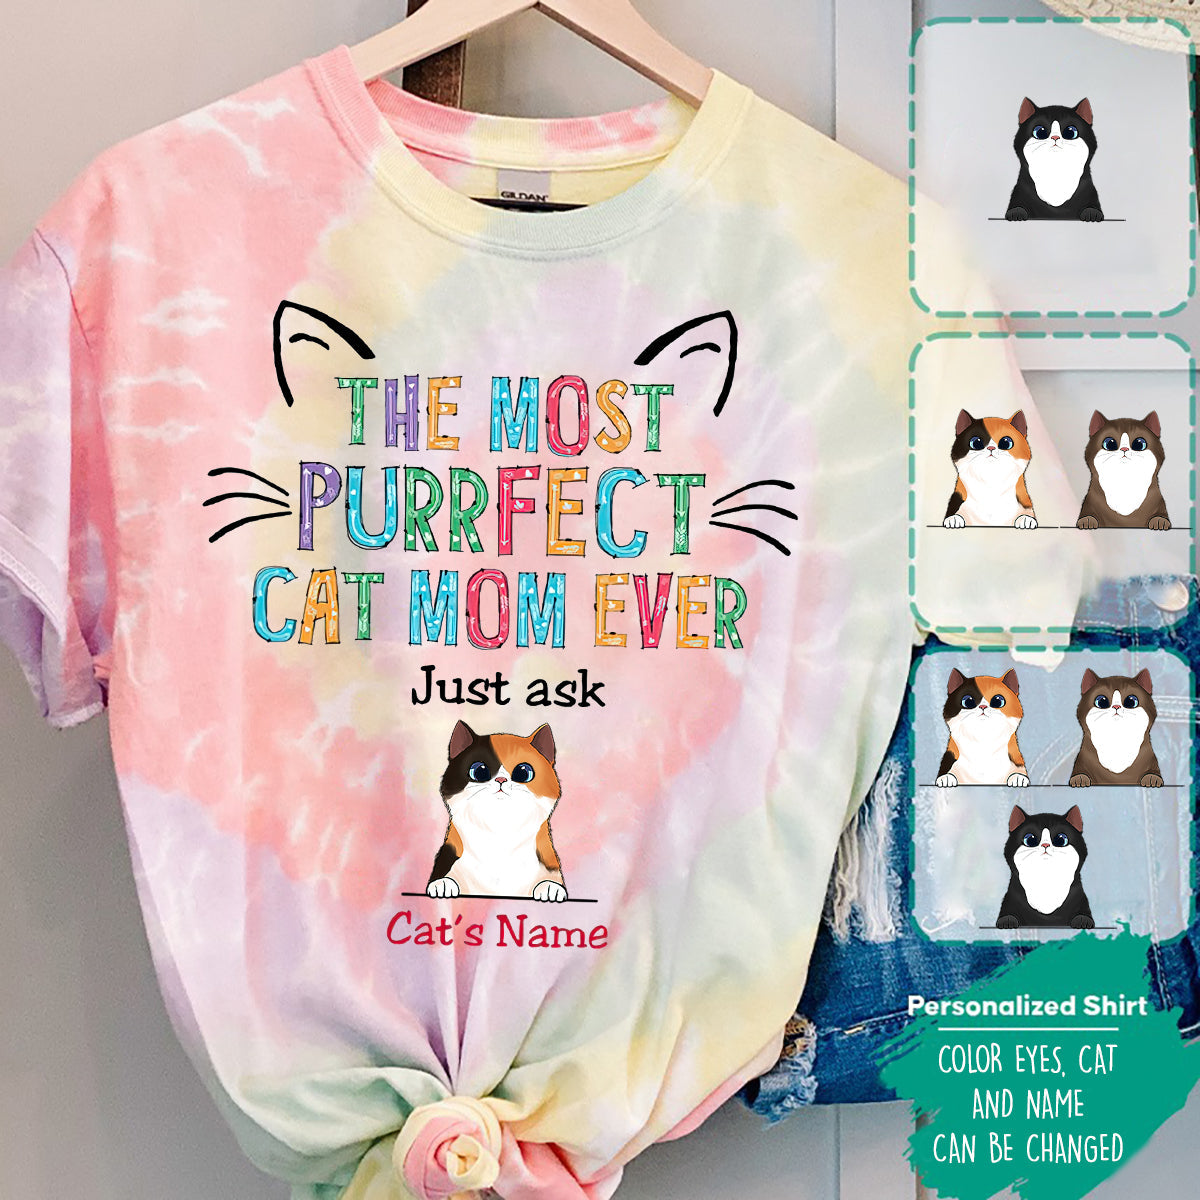 The most purrfect cat mom ever personlized shirt